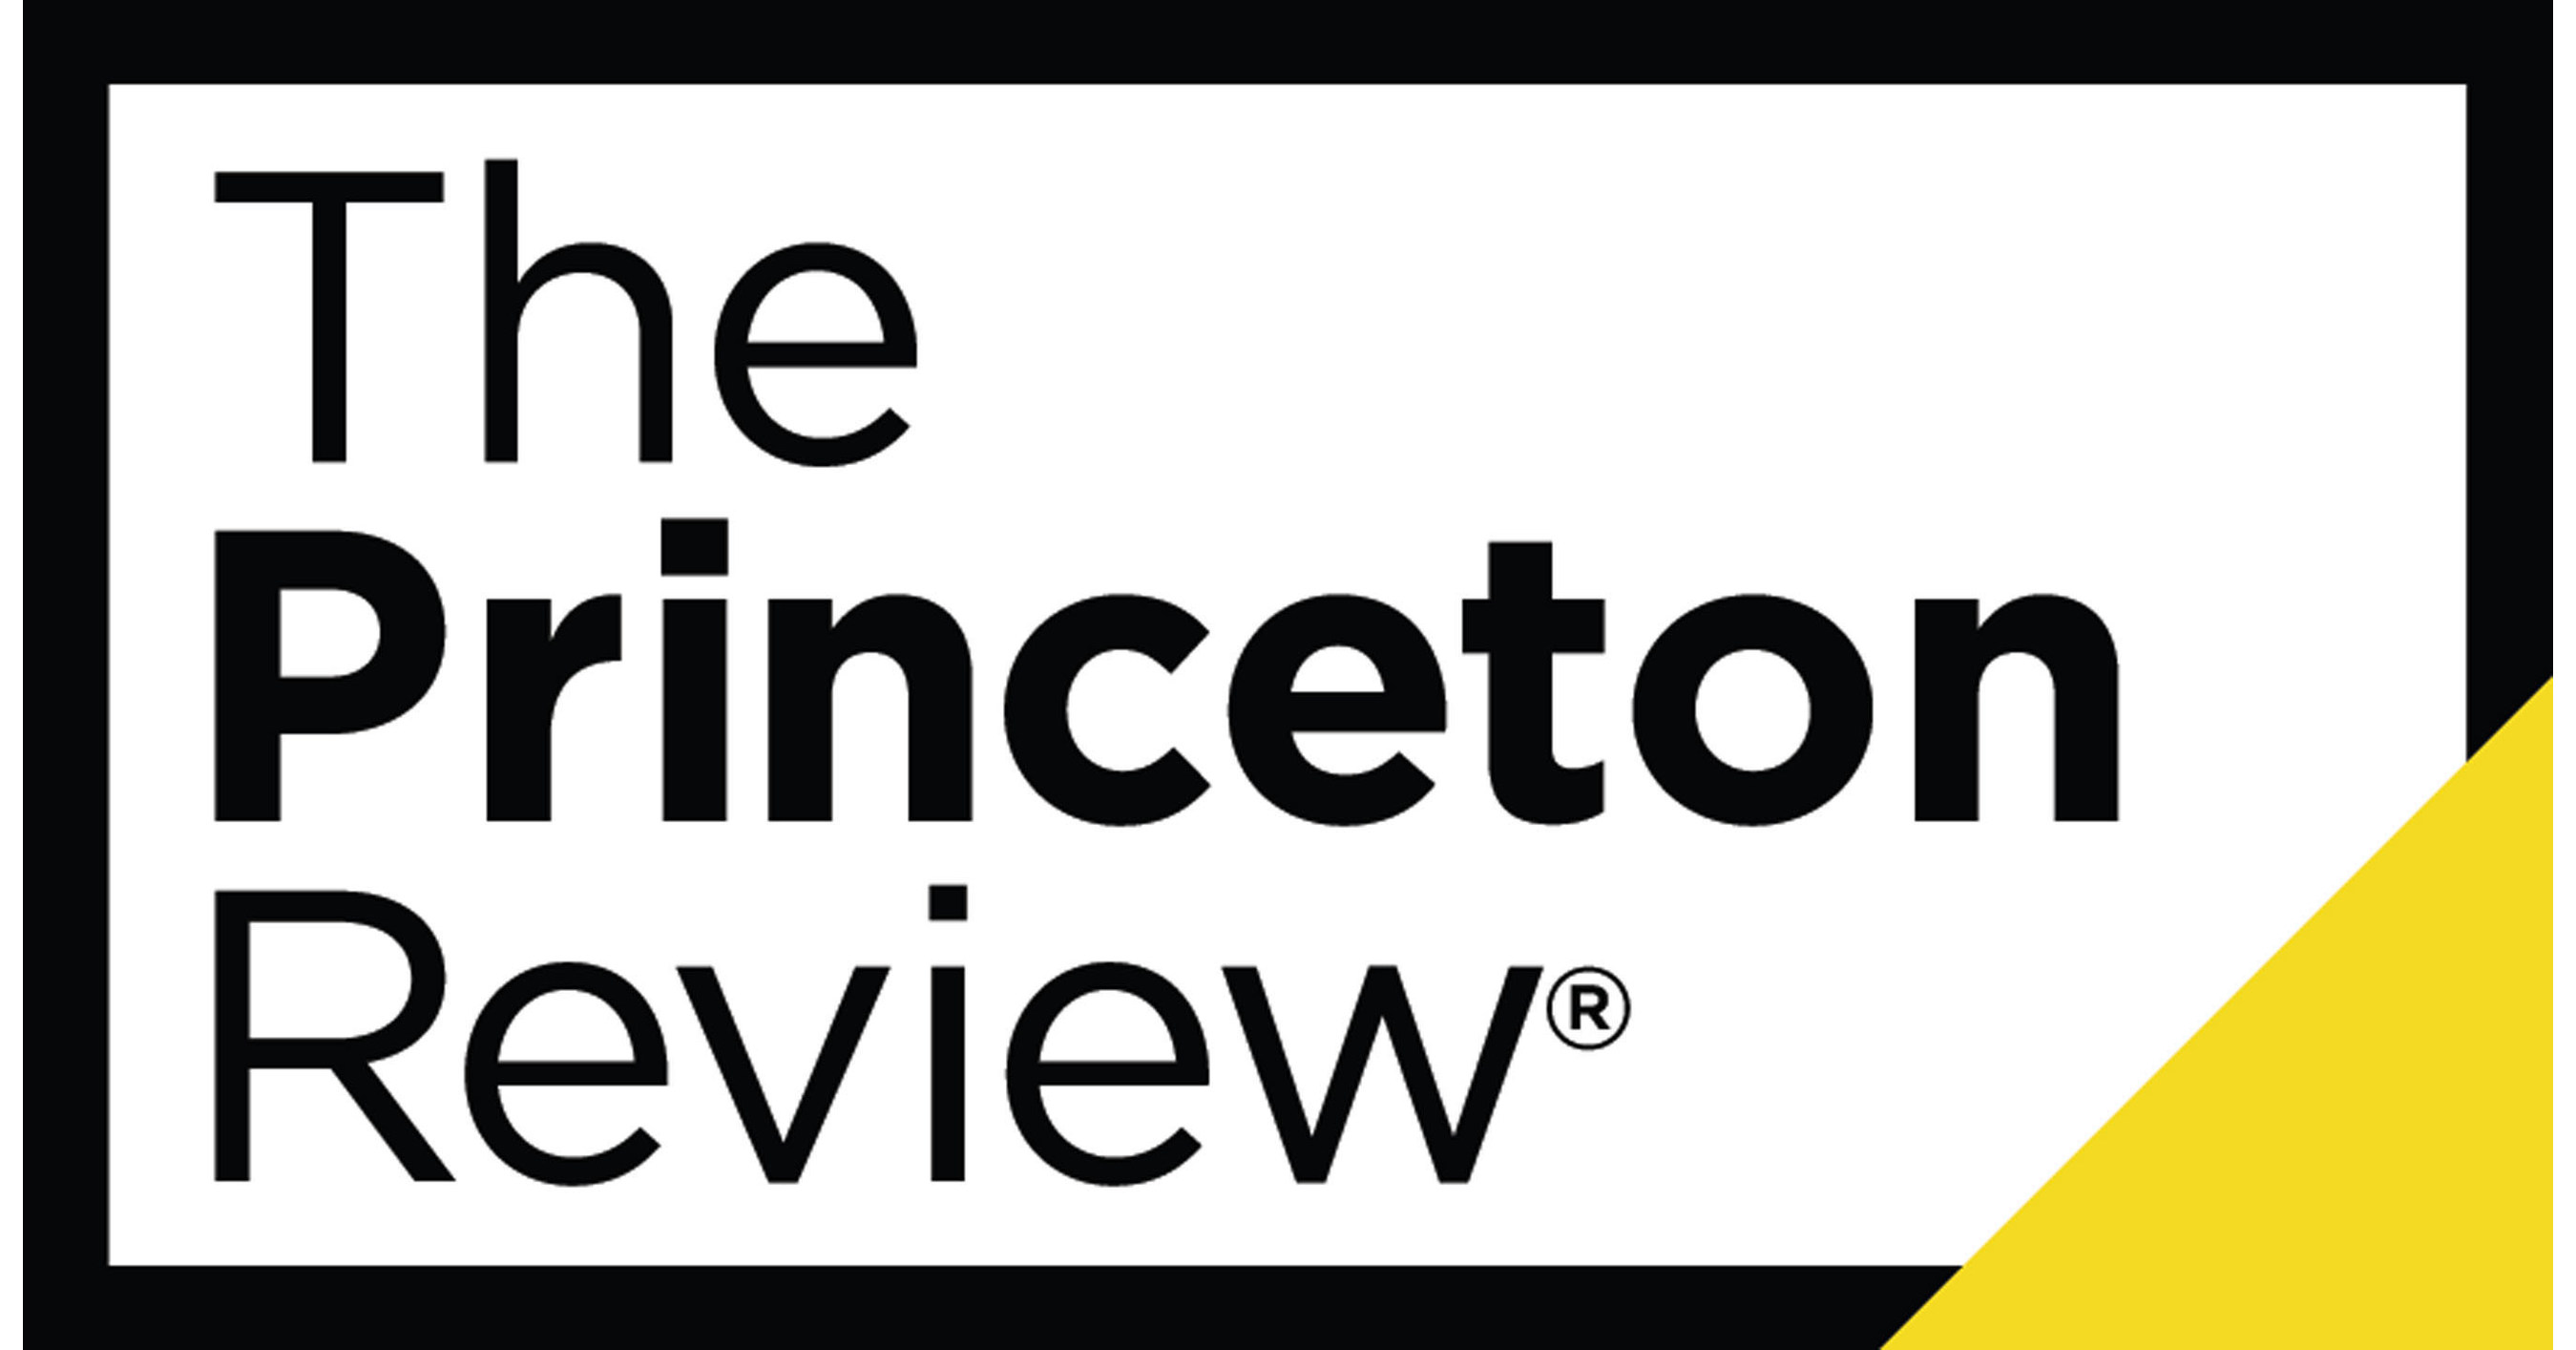 The Princeton Review Has Released "The Best 387 Colleges: 2022 Edition"